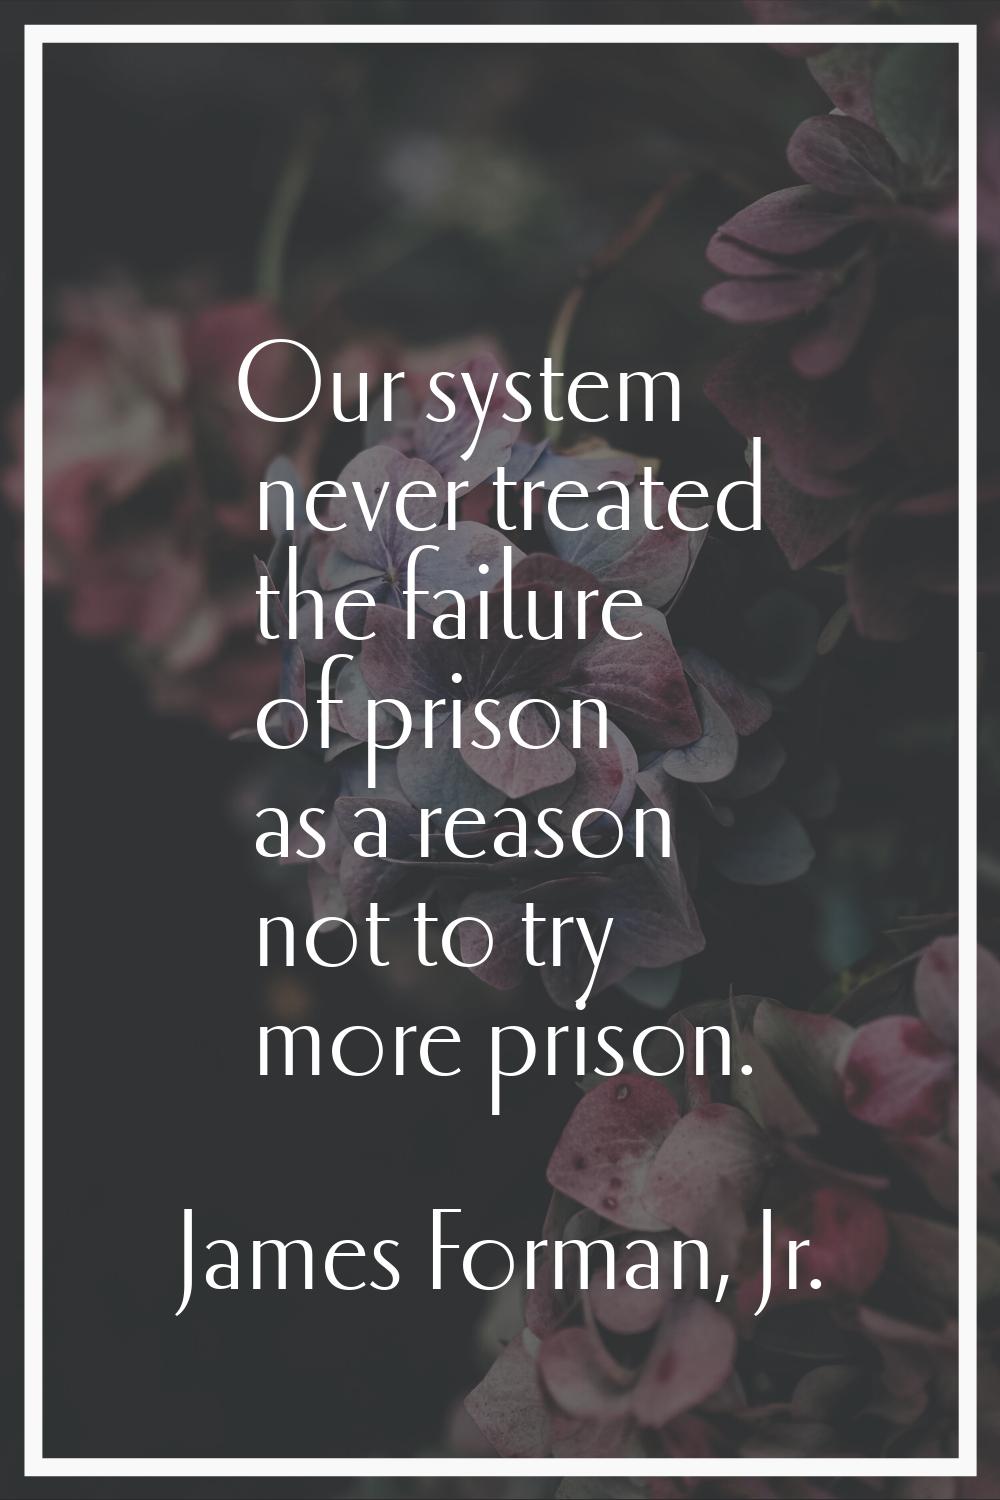 Our system never treated the failure of prison as a reason not to try more prison.